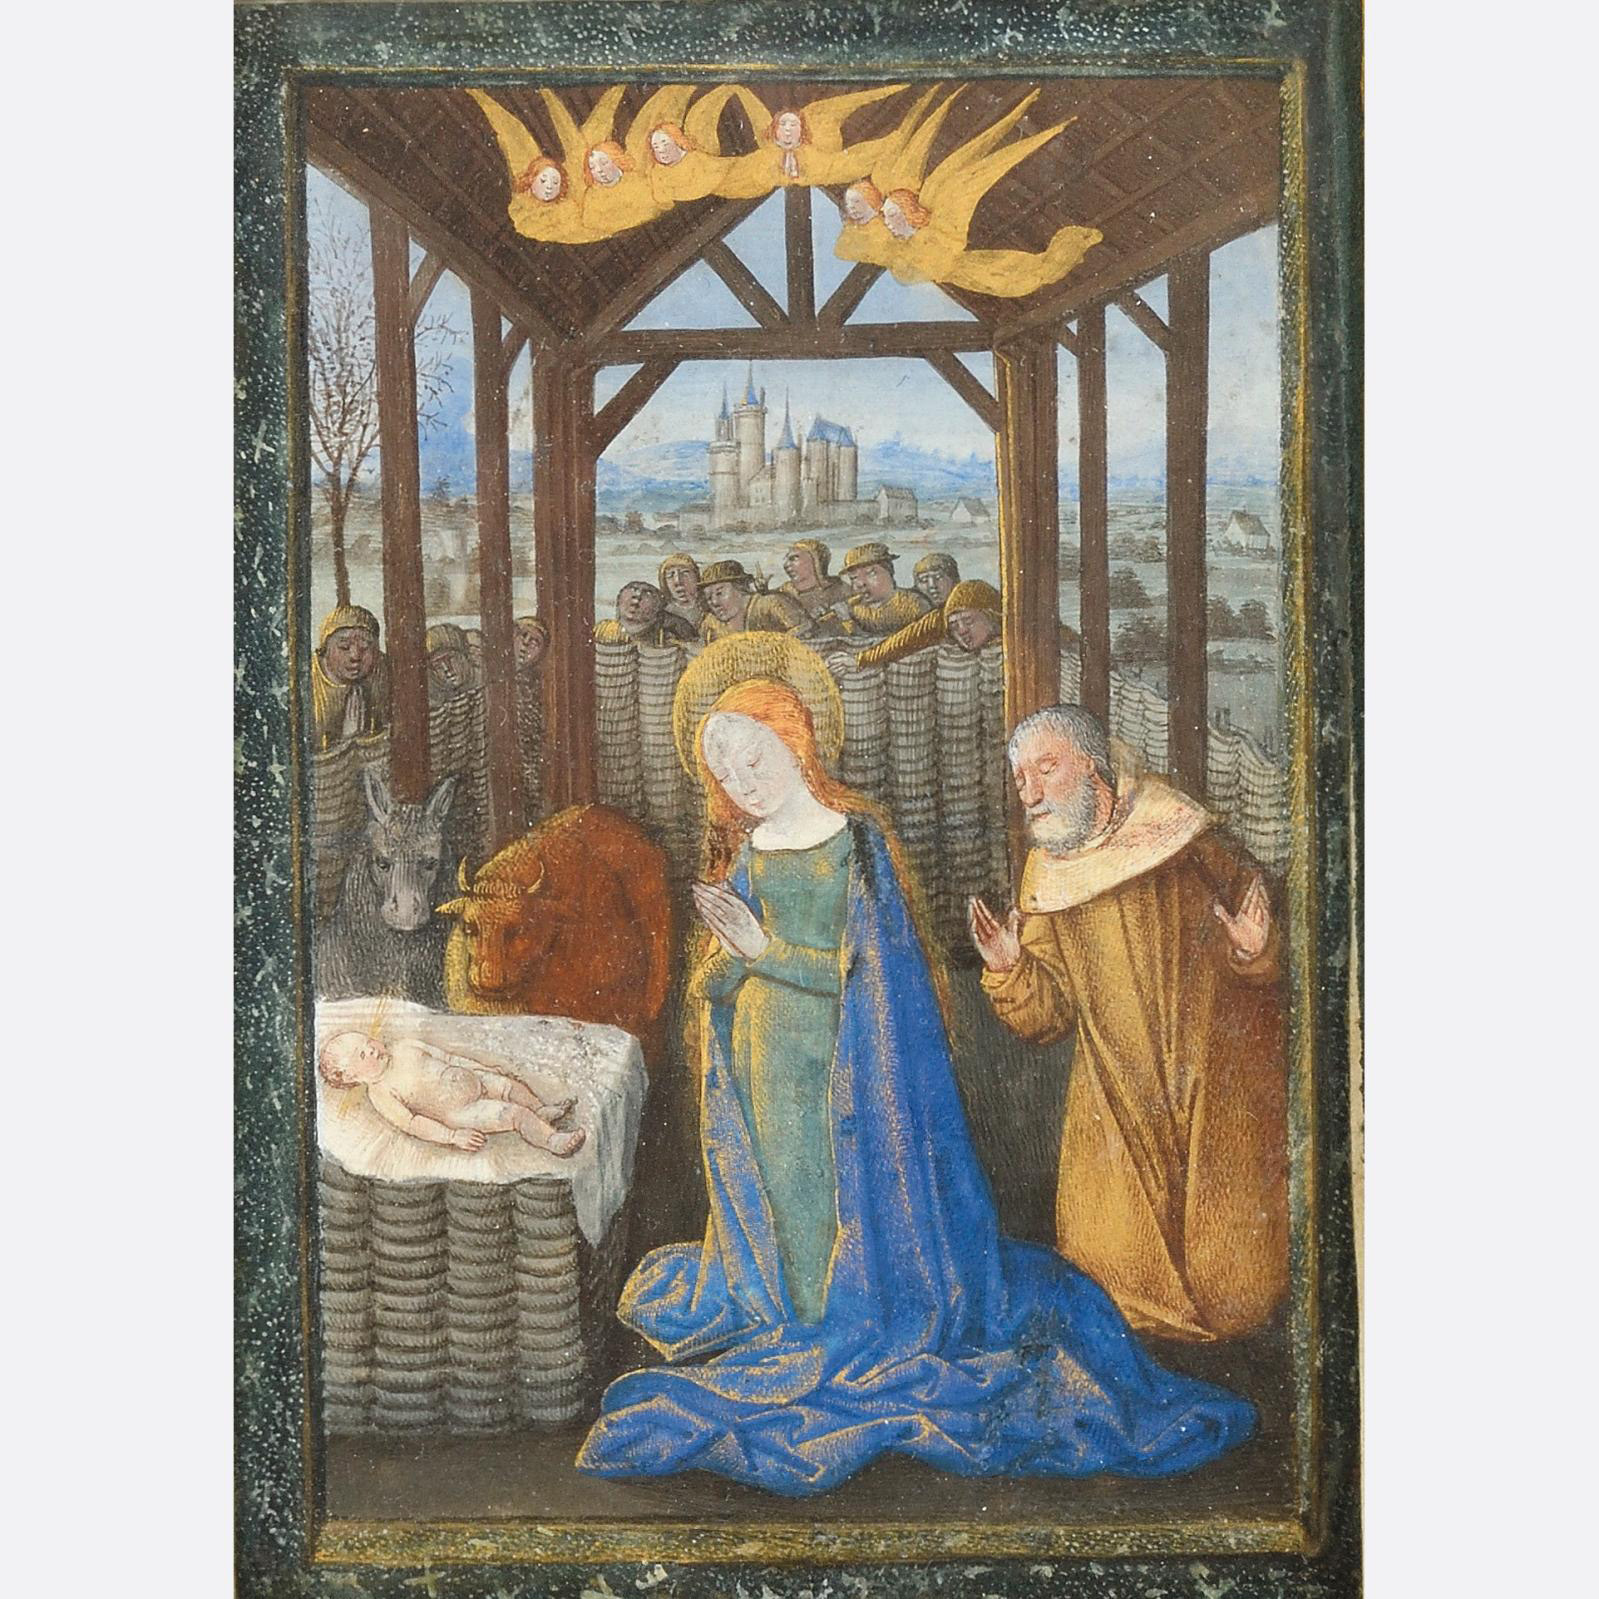 A 15th-Century Nativity Scene Goes to the Musée de Cluny